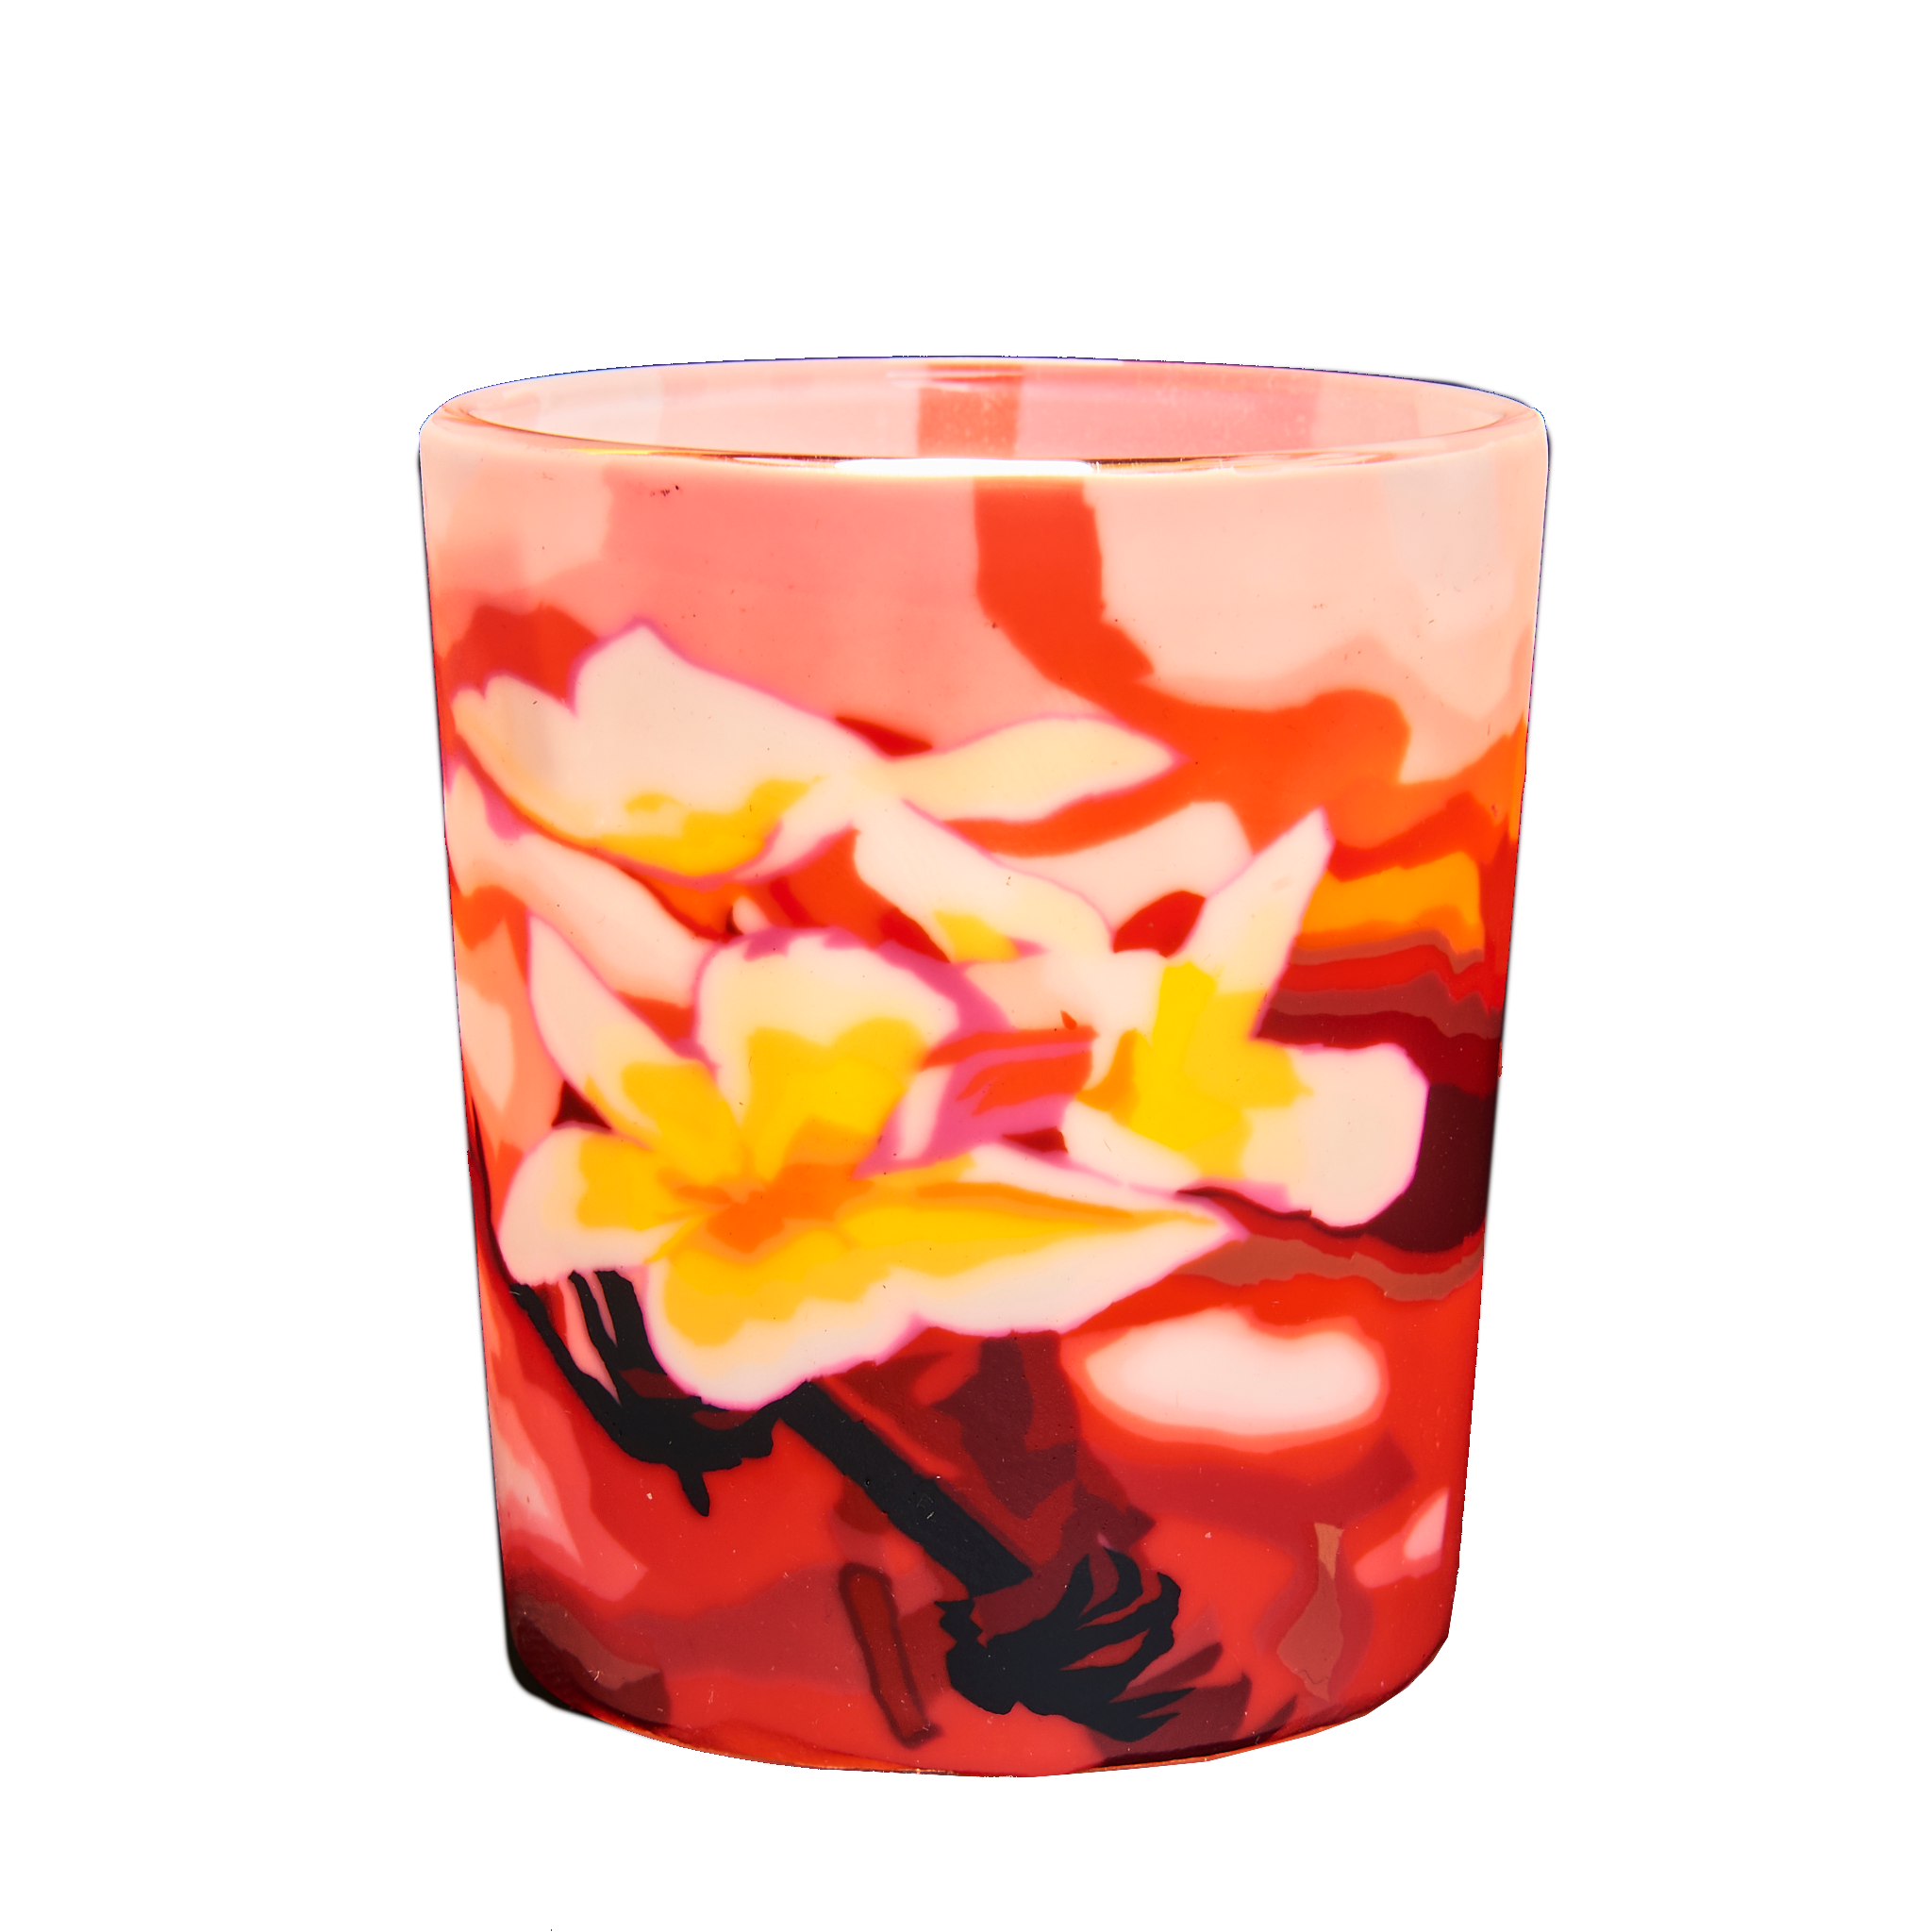 Magnolia Votive Glowing Glass, Pack of 6